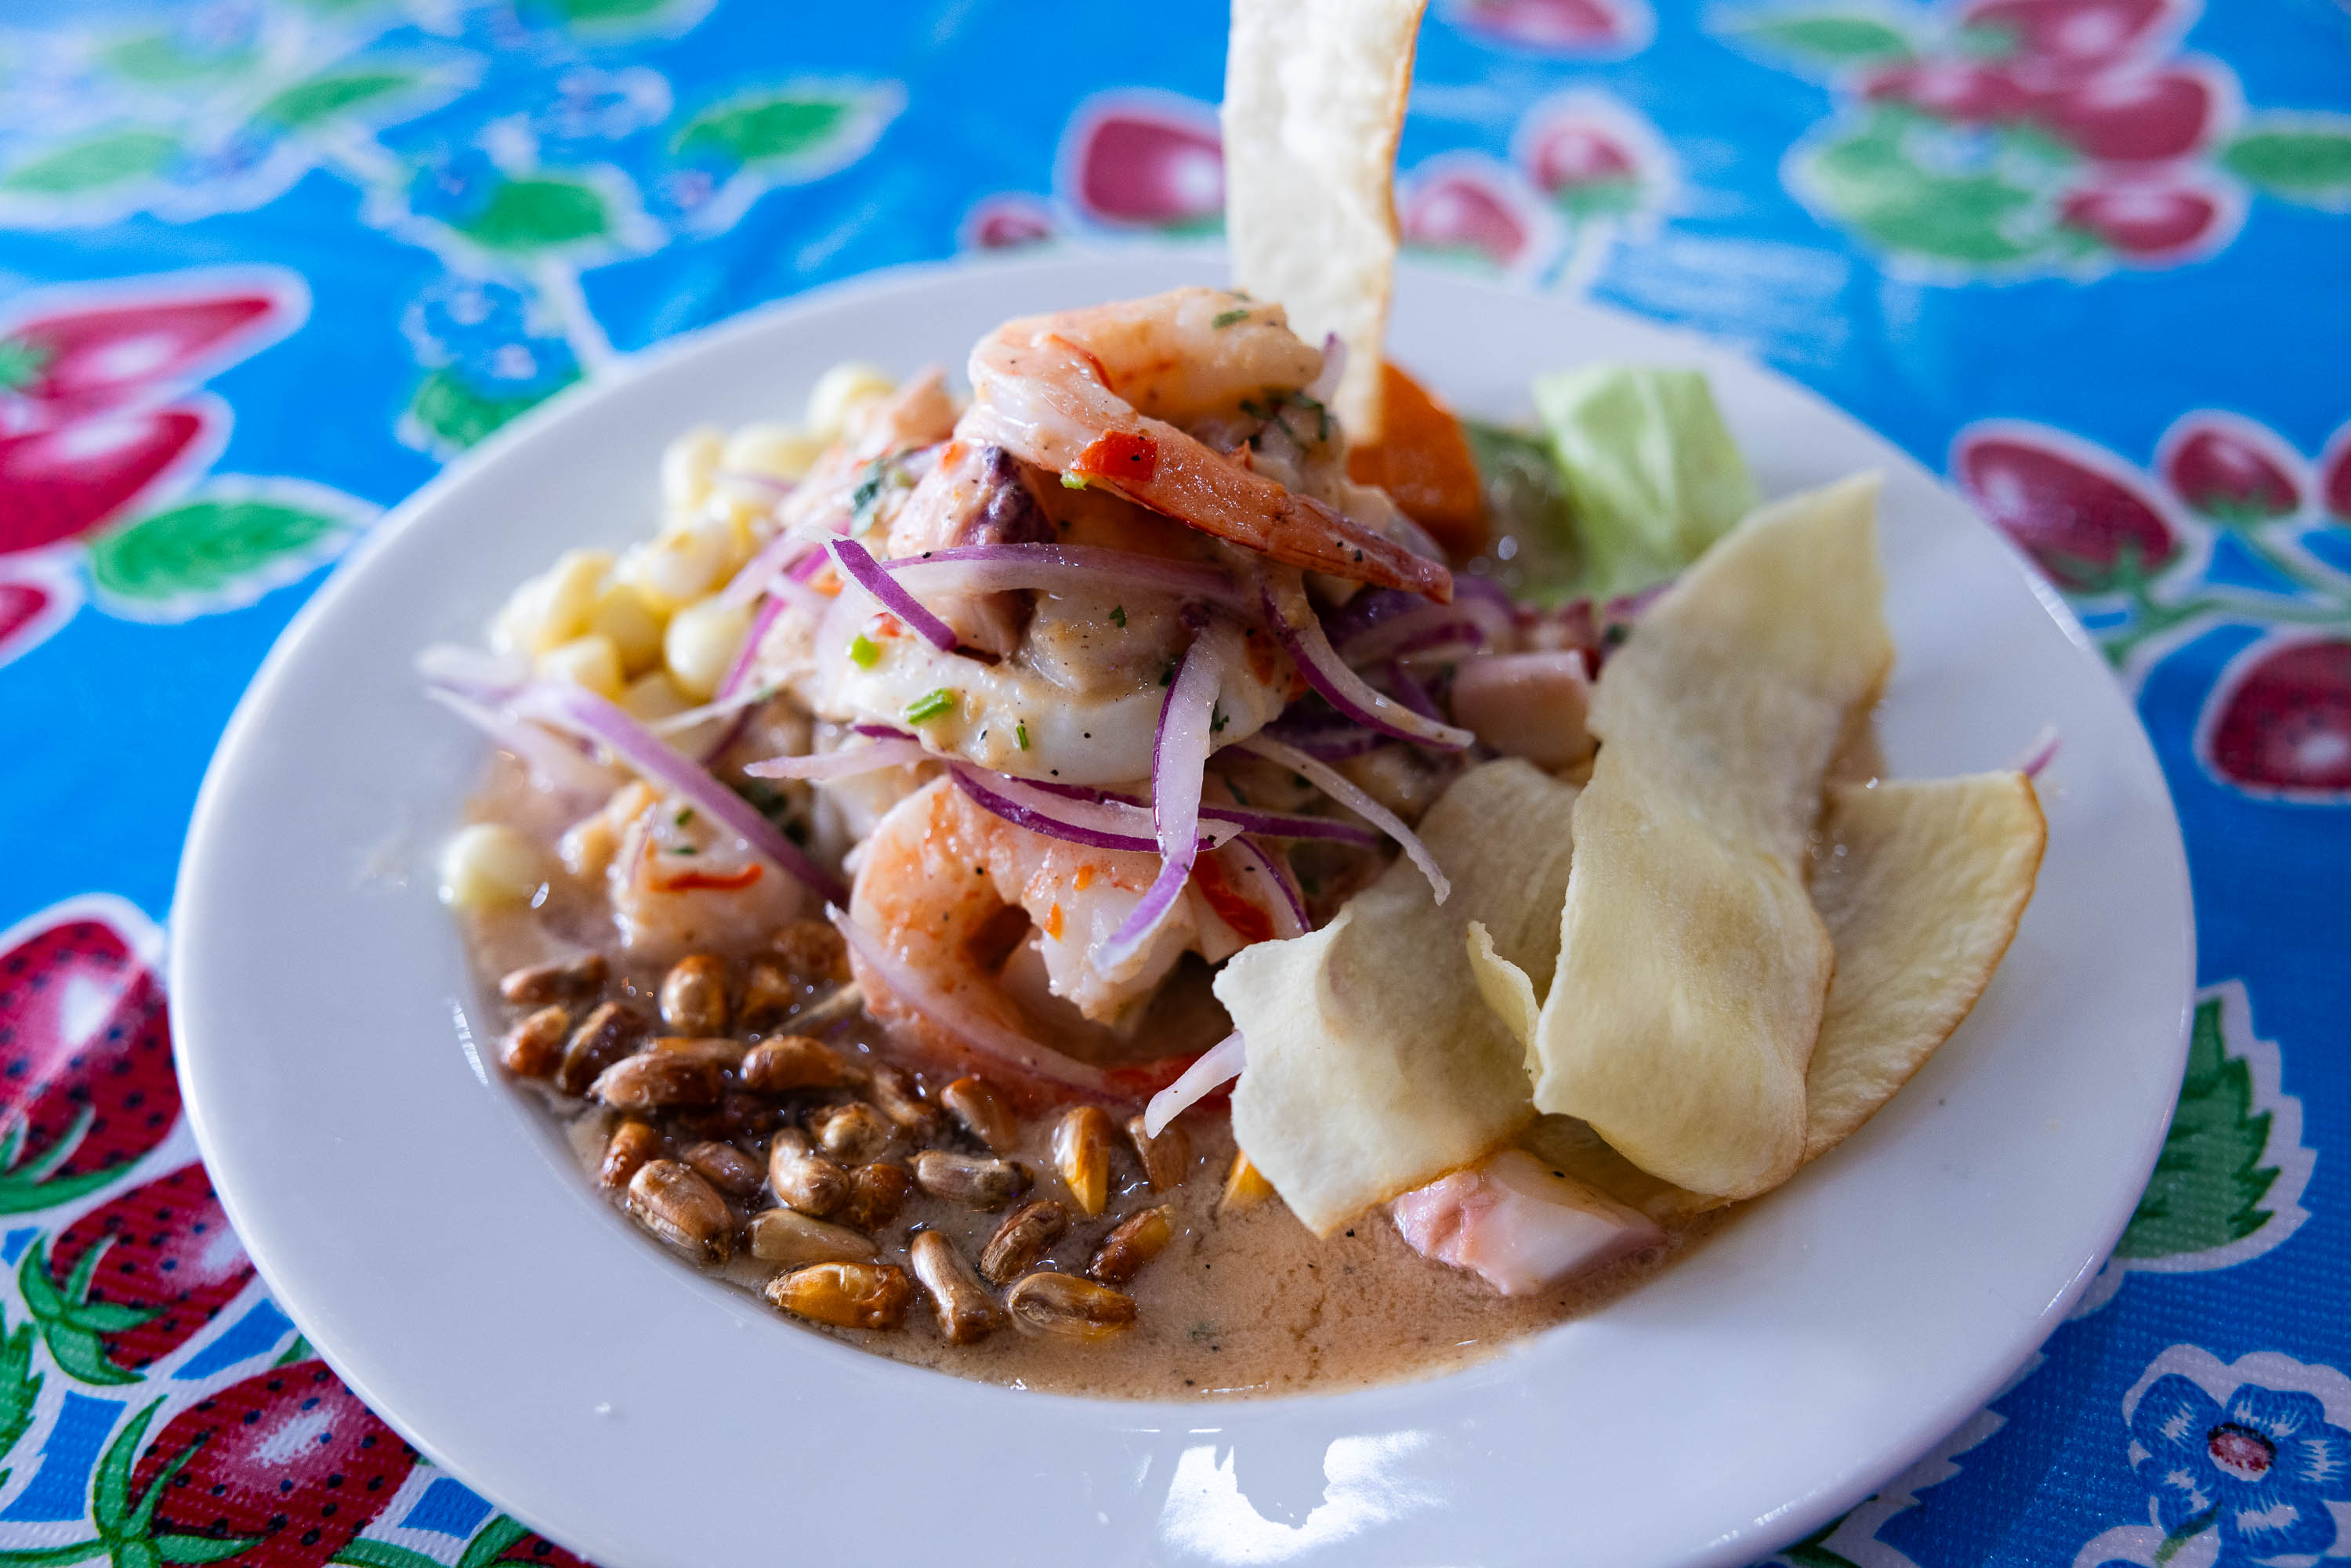 A plate of ceviche with shrimp, corn, onion, and fried plantains on a blue floral tablecloth.